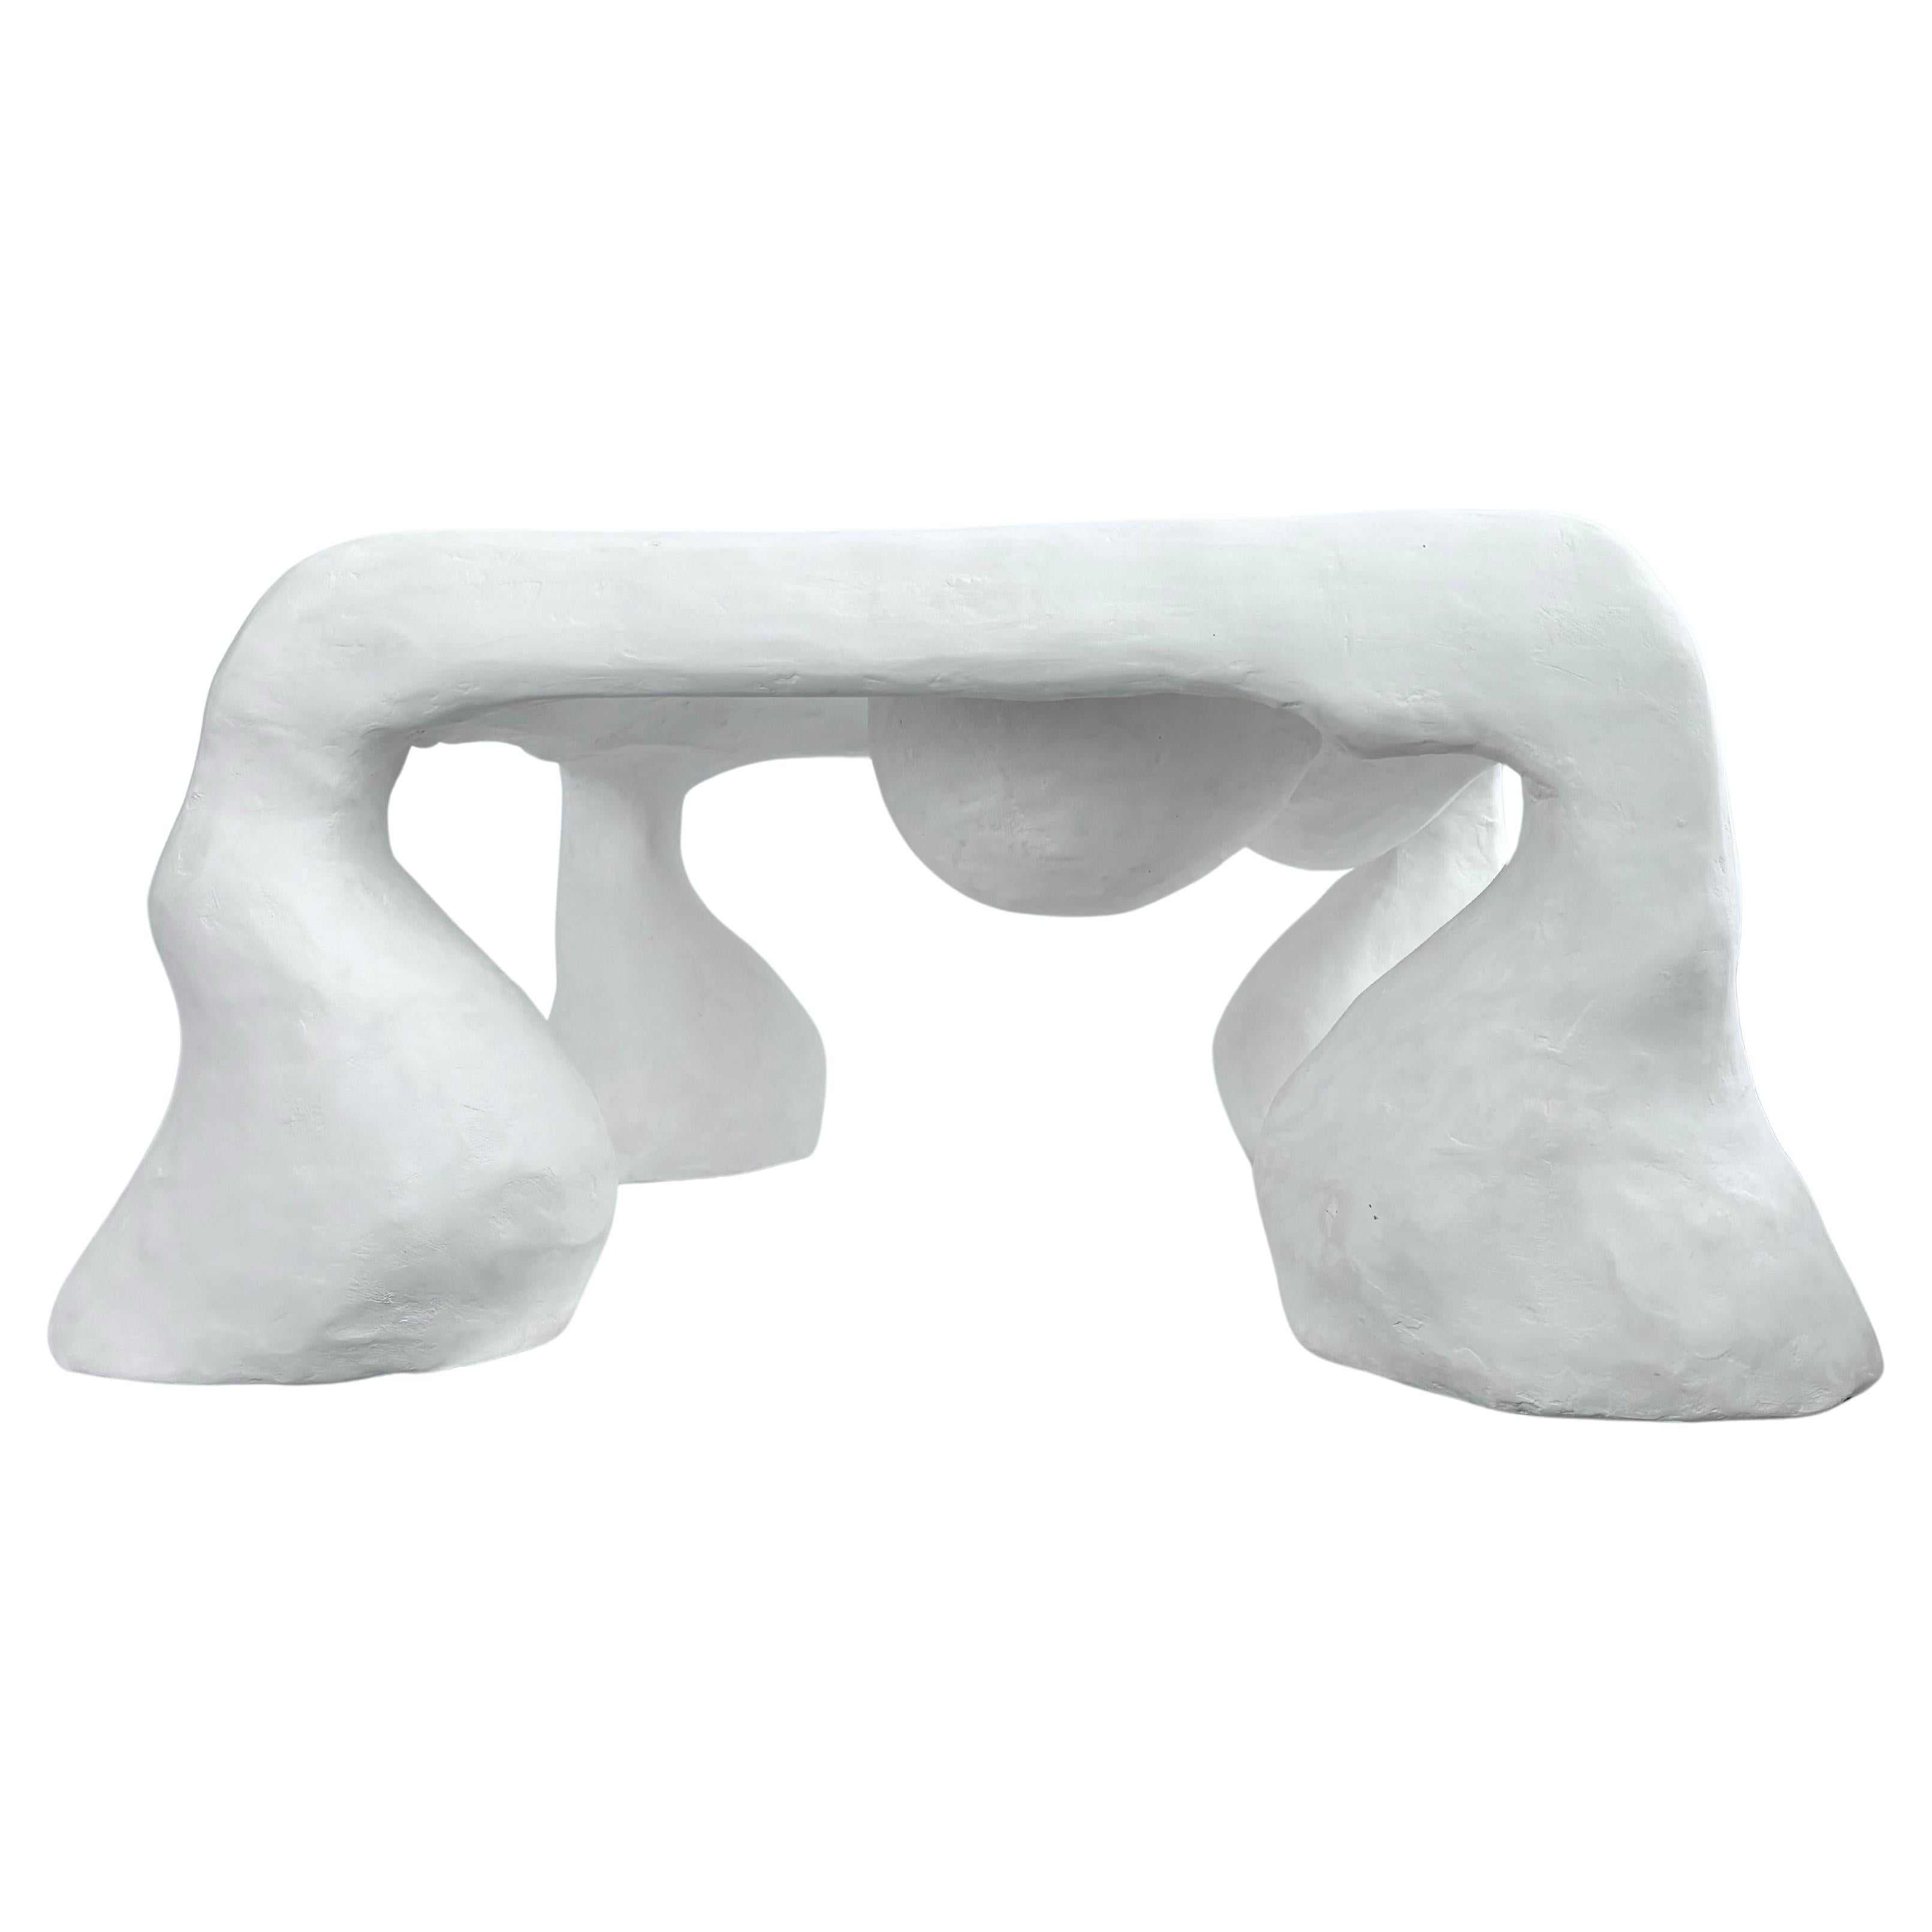 Designed by Studio Chora, 2024.
Biomorphic: ‘bios' meaning life and 'morphe' meaning form. 

The 'Mother' coffee or accent table is organically-shaped and part of the biomorphic series of plaster sculptures. This functional sculpture is